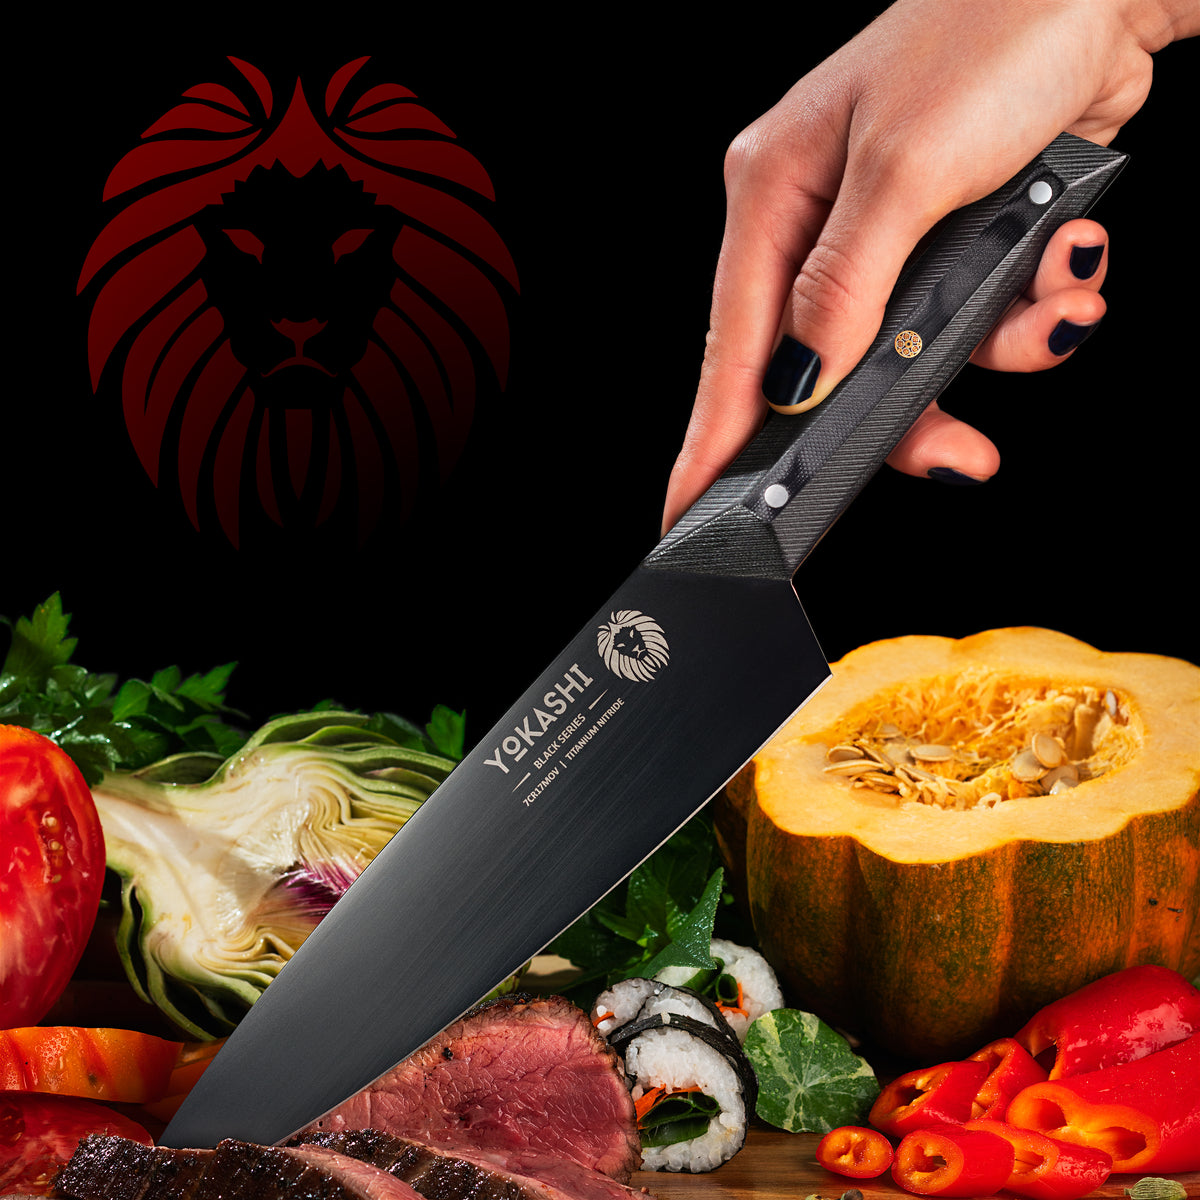 Black Series chef knife 8 inch